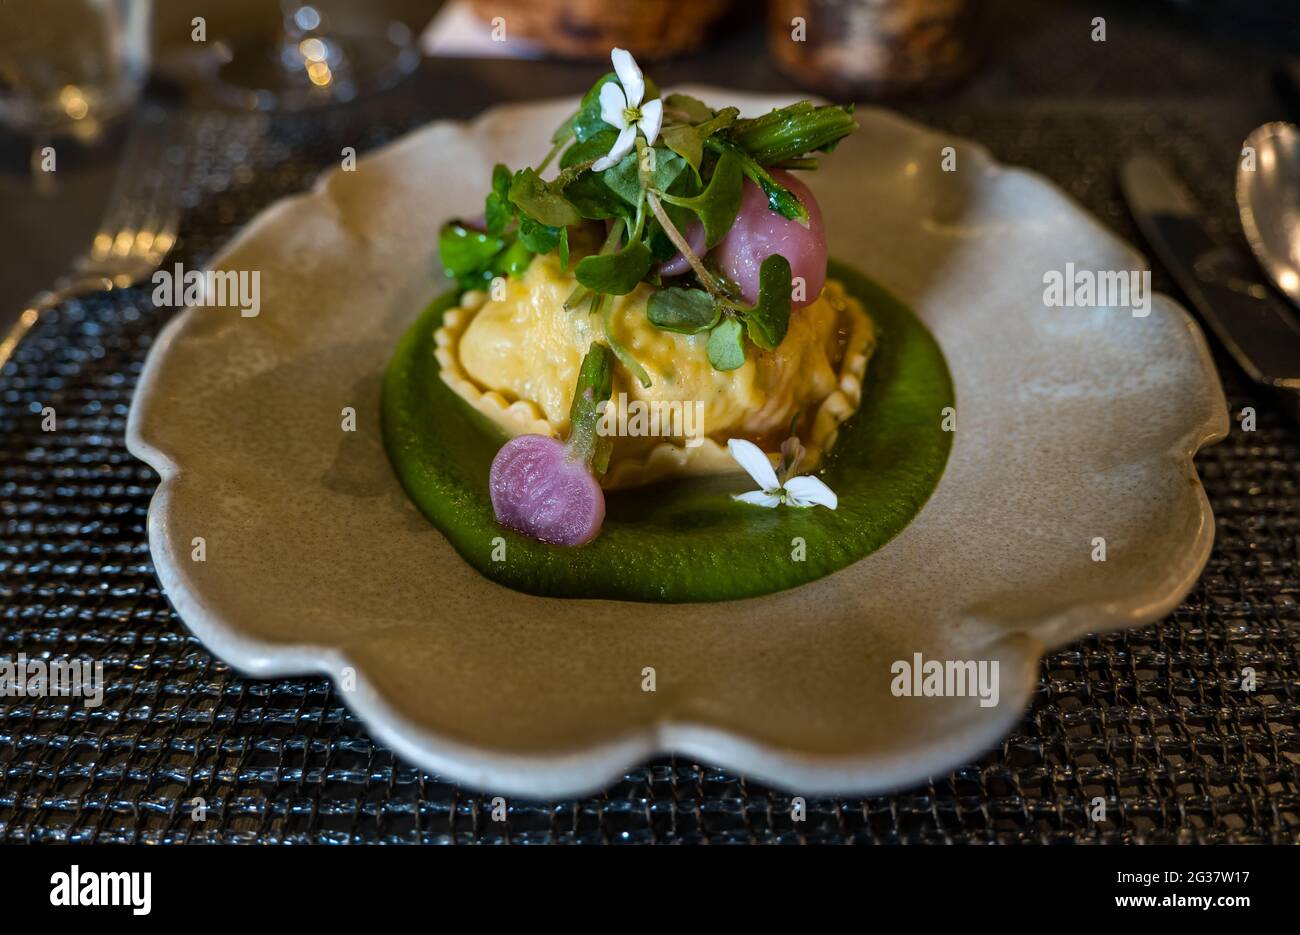 Starter course of ravioli with radishes and lovage puree served at a fine dining restaurant table Stock Photo